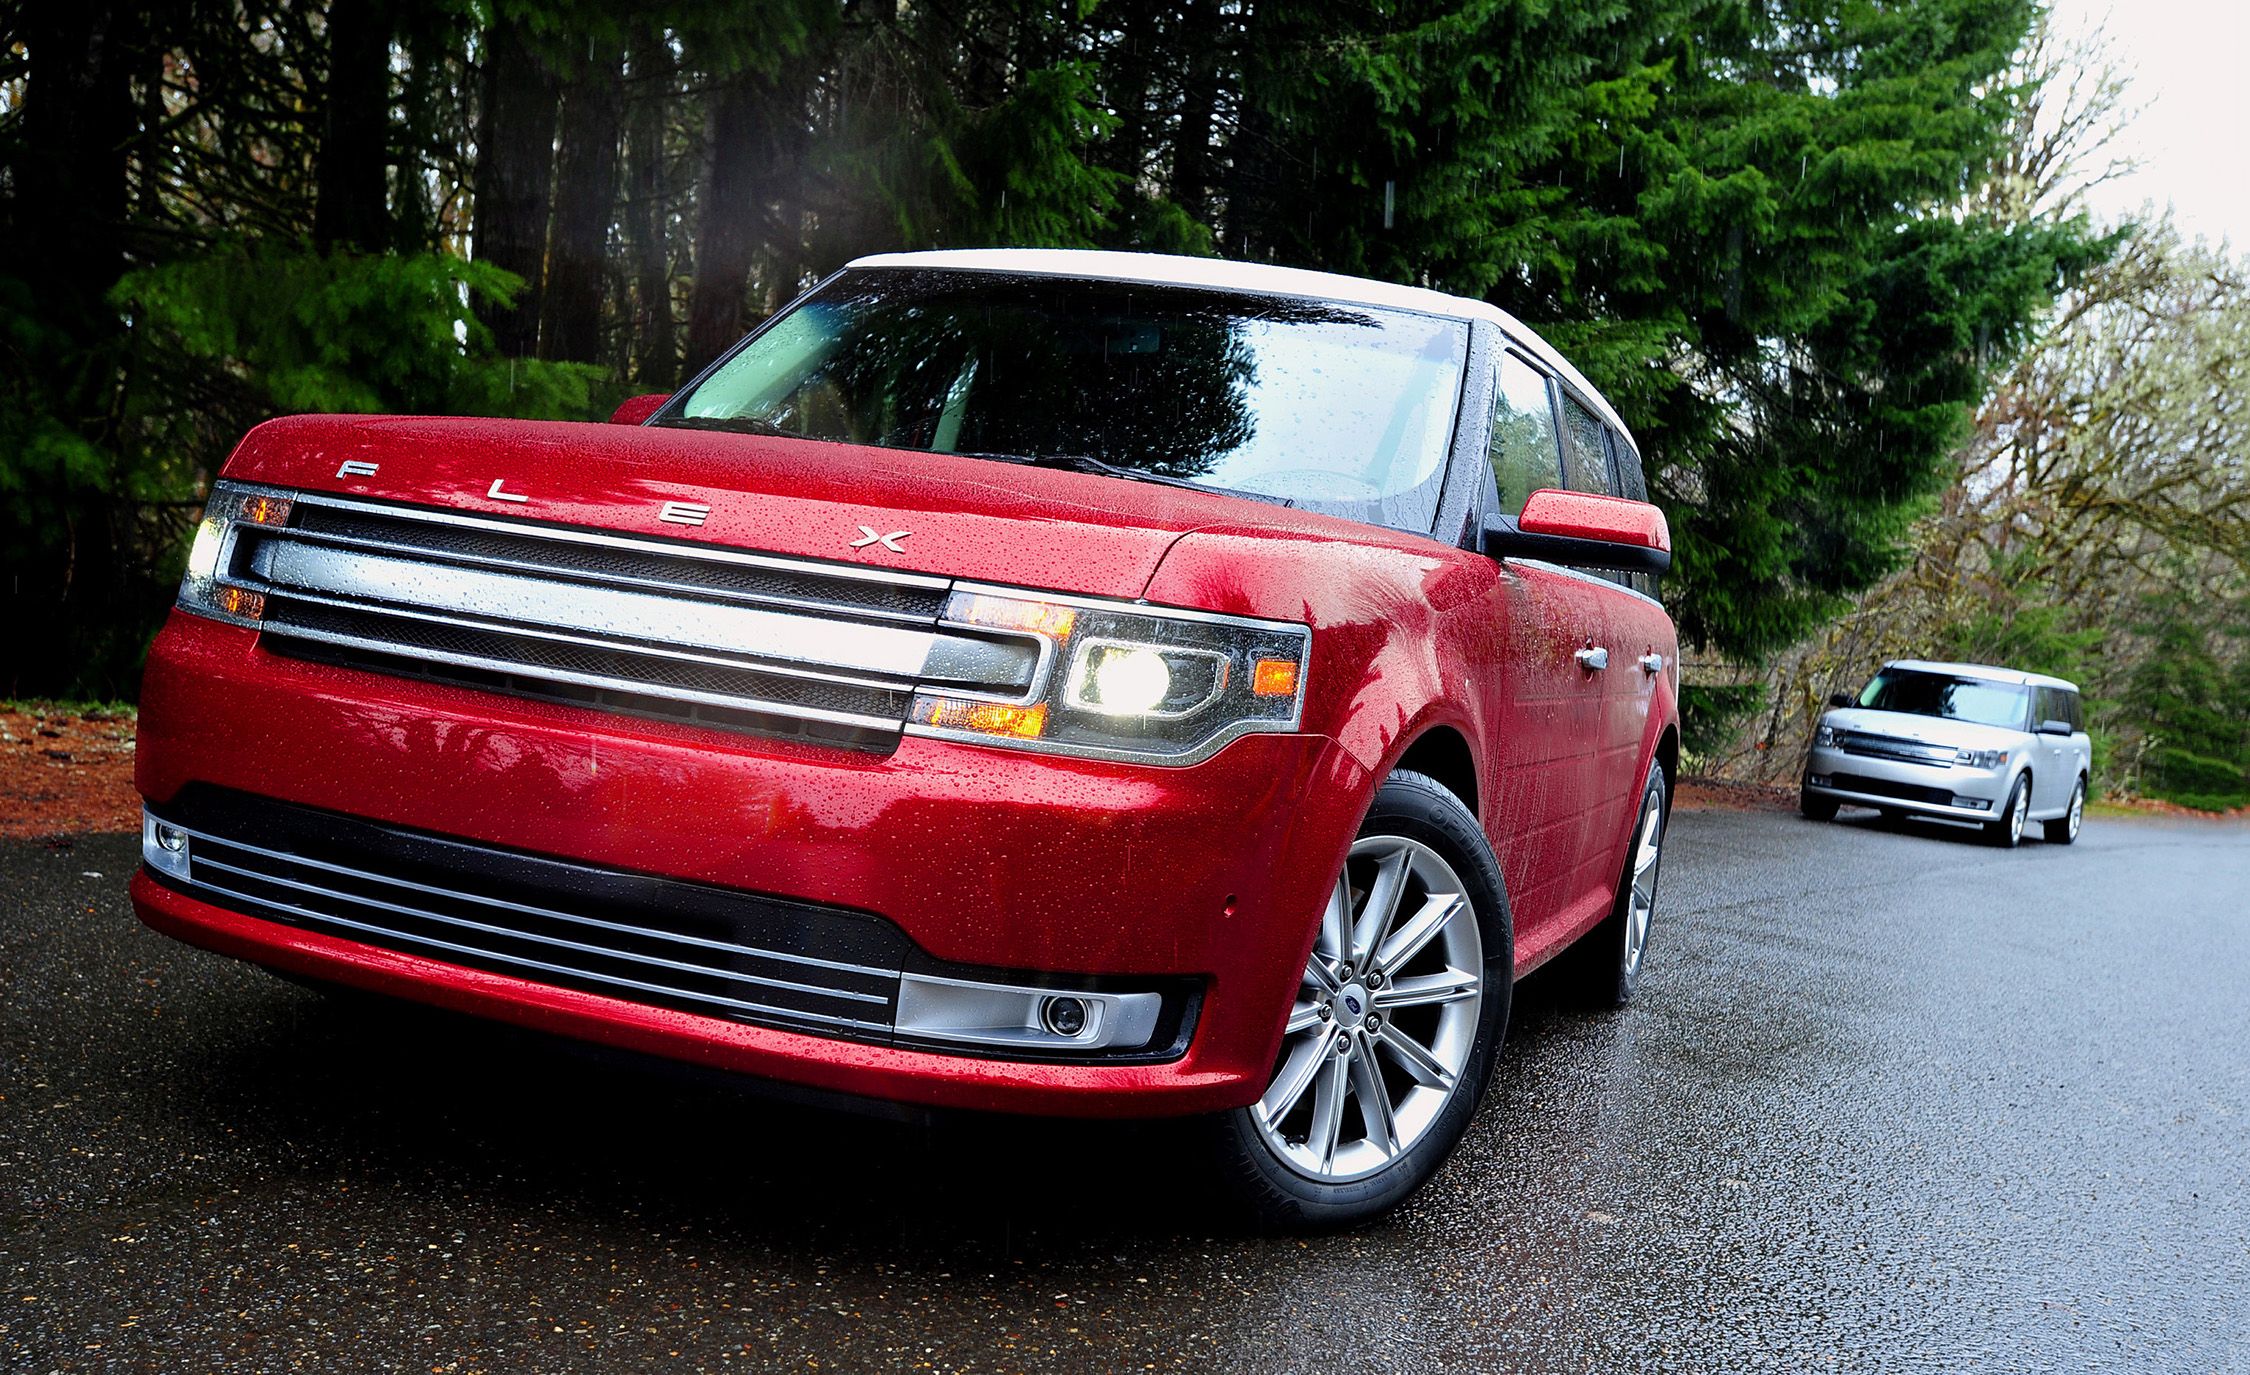 2017 Ford Flex Review, Pricing, and Specs